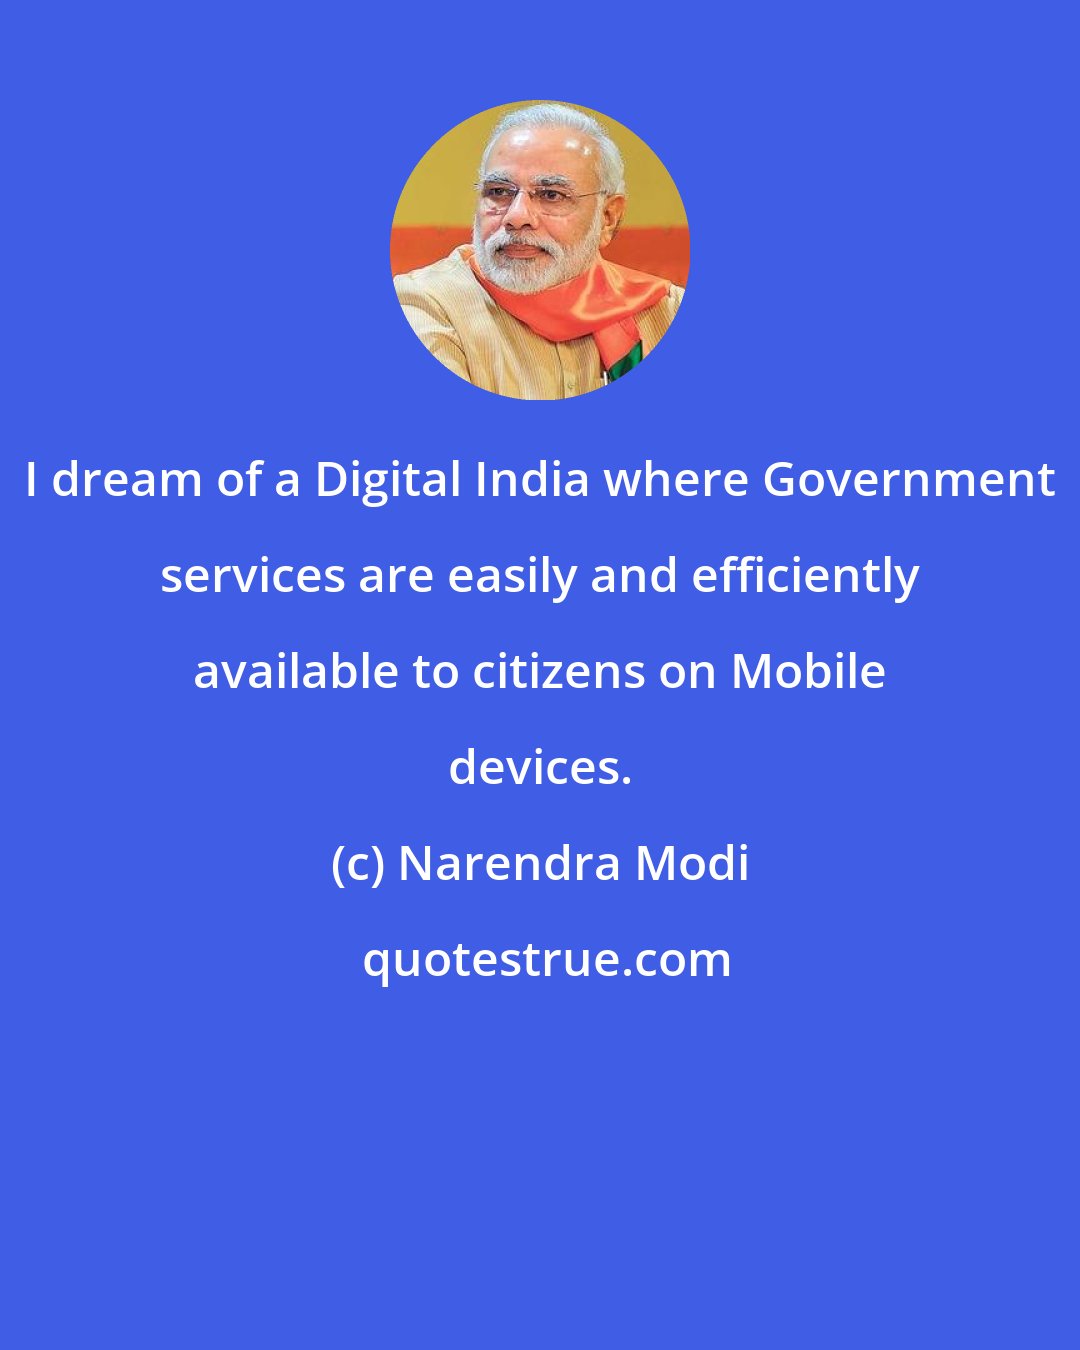 Narendra Modi: I dream of a Digital India where Government services are easily and efficiently available to citizens on Mobile devices.